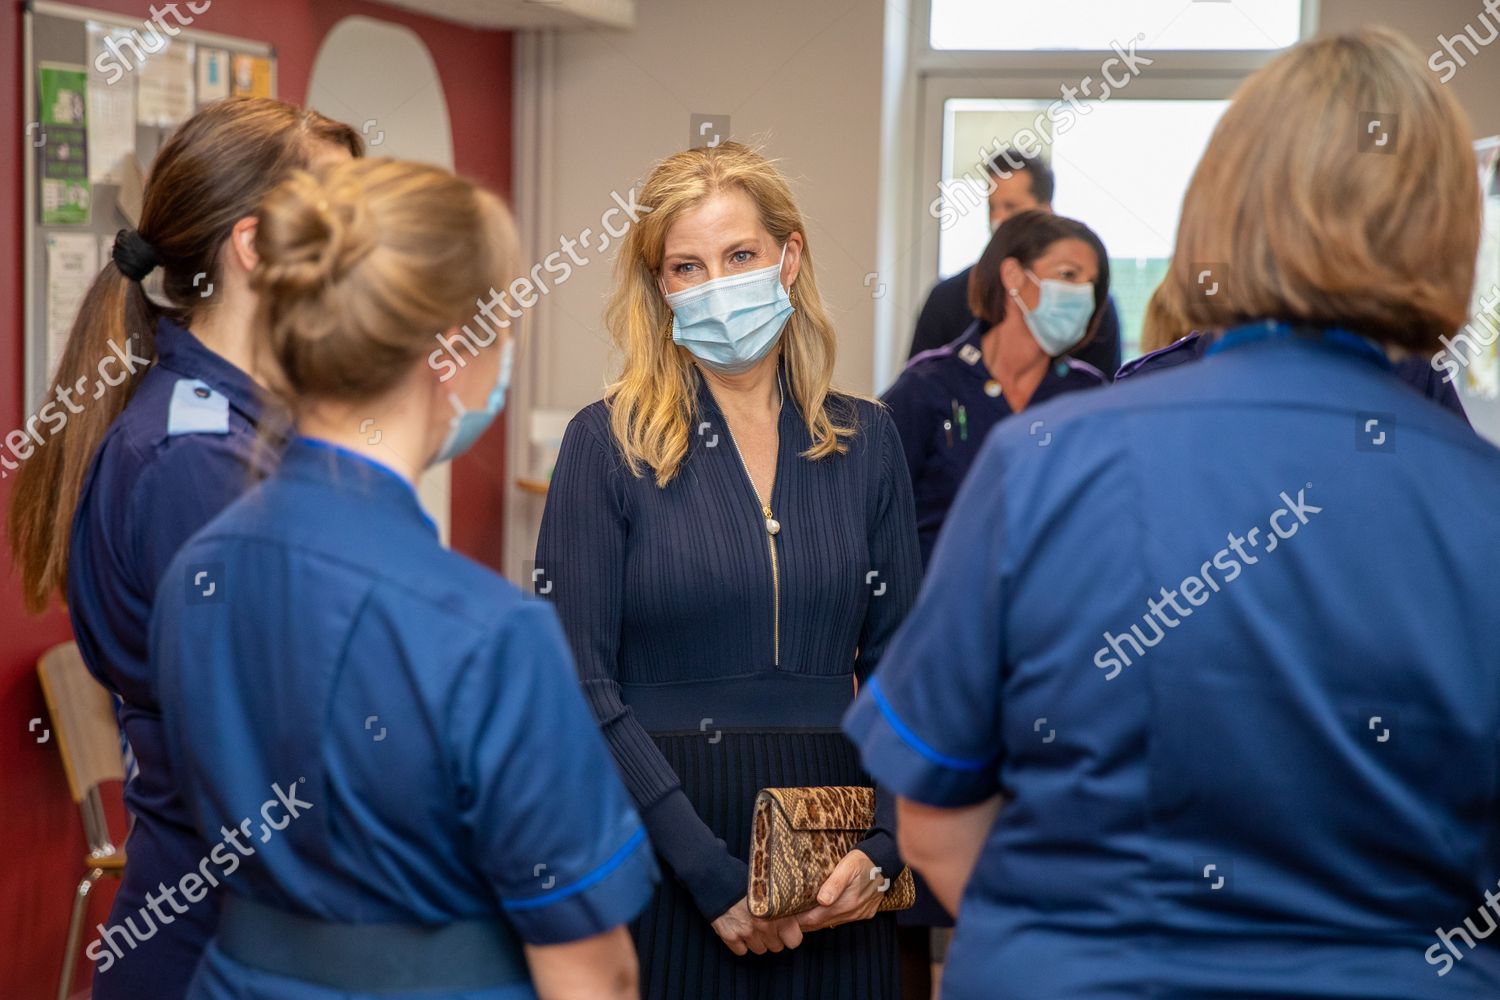 sophie-countess-of-wessex-and-prince-edward-visit-to-frimley-park-hospital-uk-shutterstock-editorial-11900147al.jpg